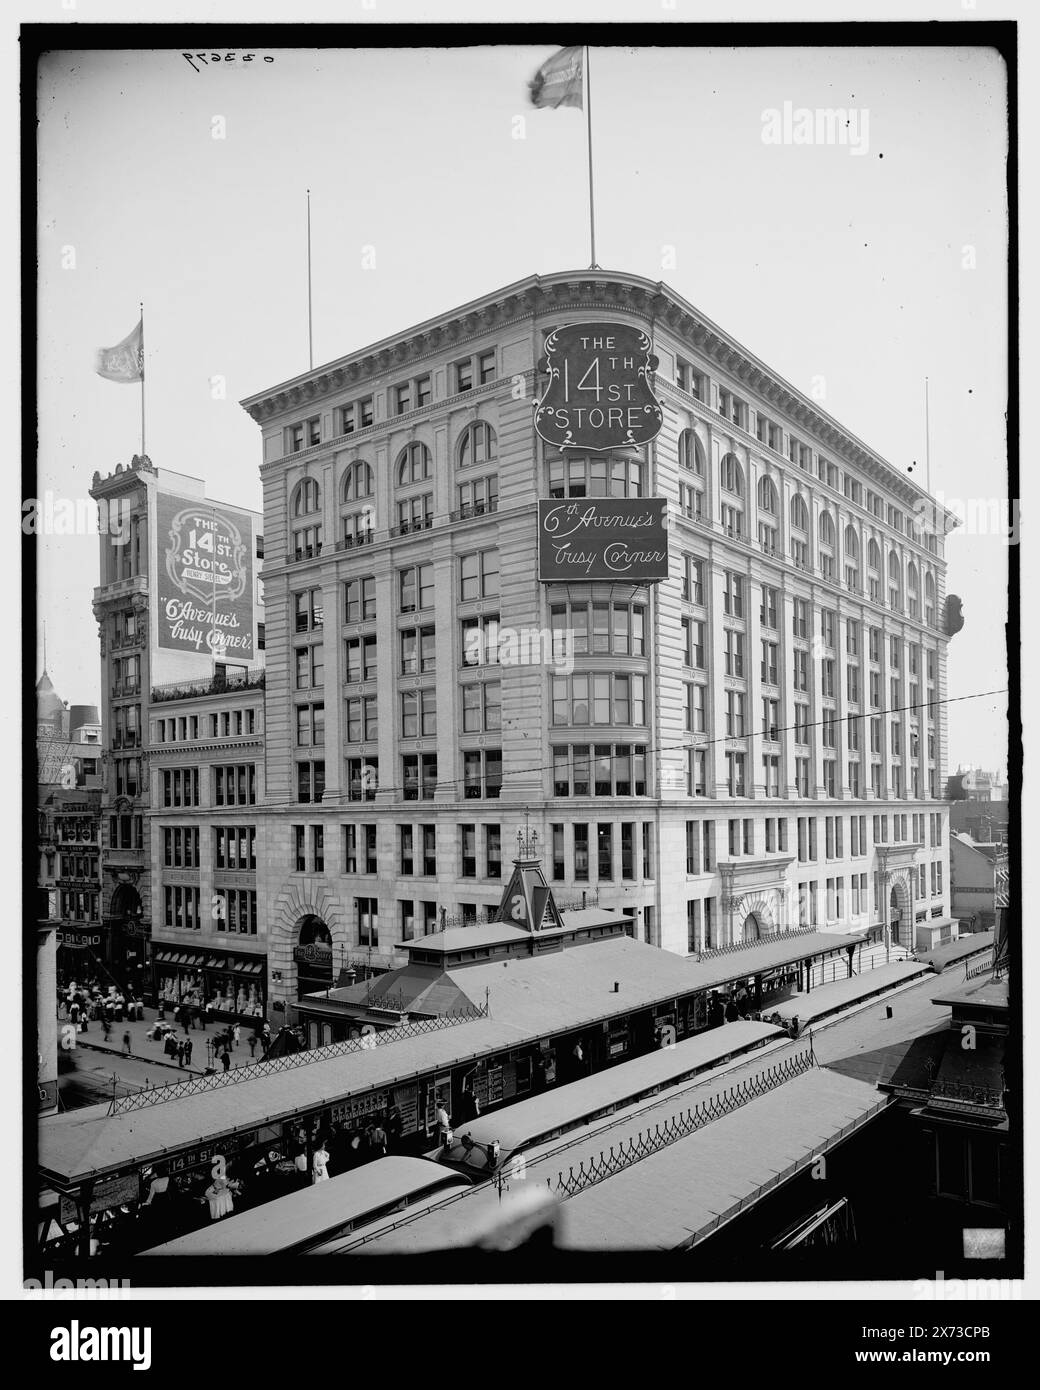 14th (Fourteenth) Street Store, New York, N.Y., Title from jacket., 'Henry Siegel, Pres.' on building., '376 A' on negative., Detroit Publishing Co. no. 033679., Gift; State Historical Society of Colorado; 1949,  Department stores. , Elevated railroads. , United States, New York (State), New York. Stock Photo